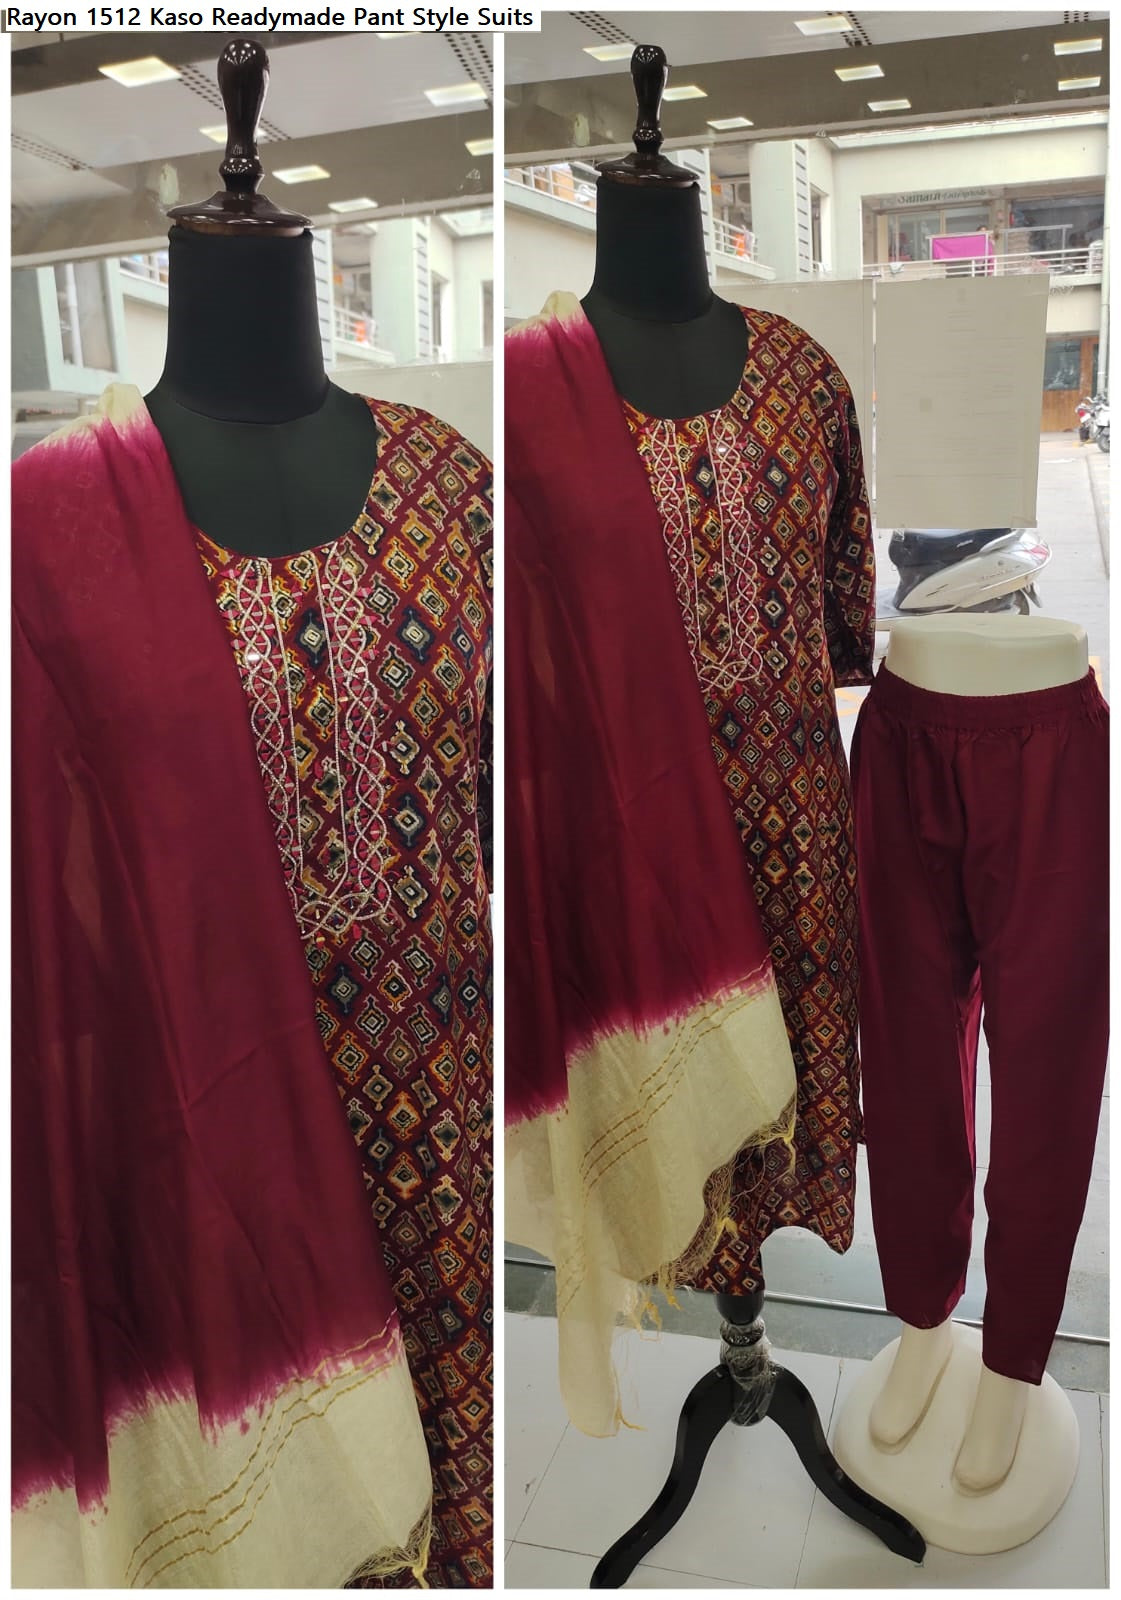 Rayon 1512 Kaso Readymade Pant Style Suits